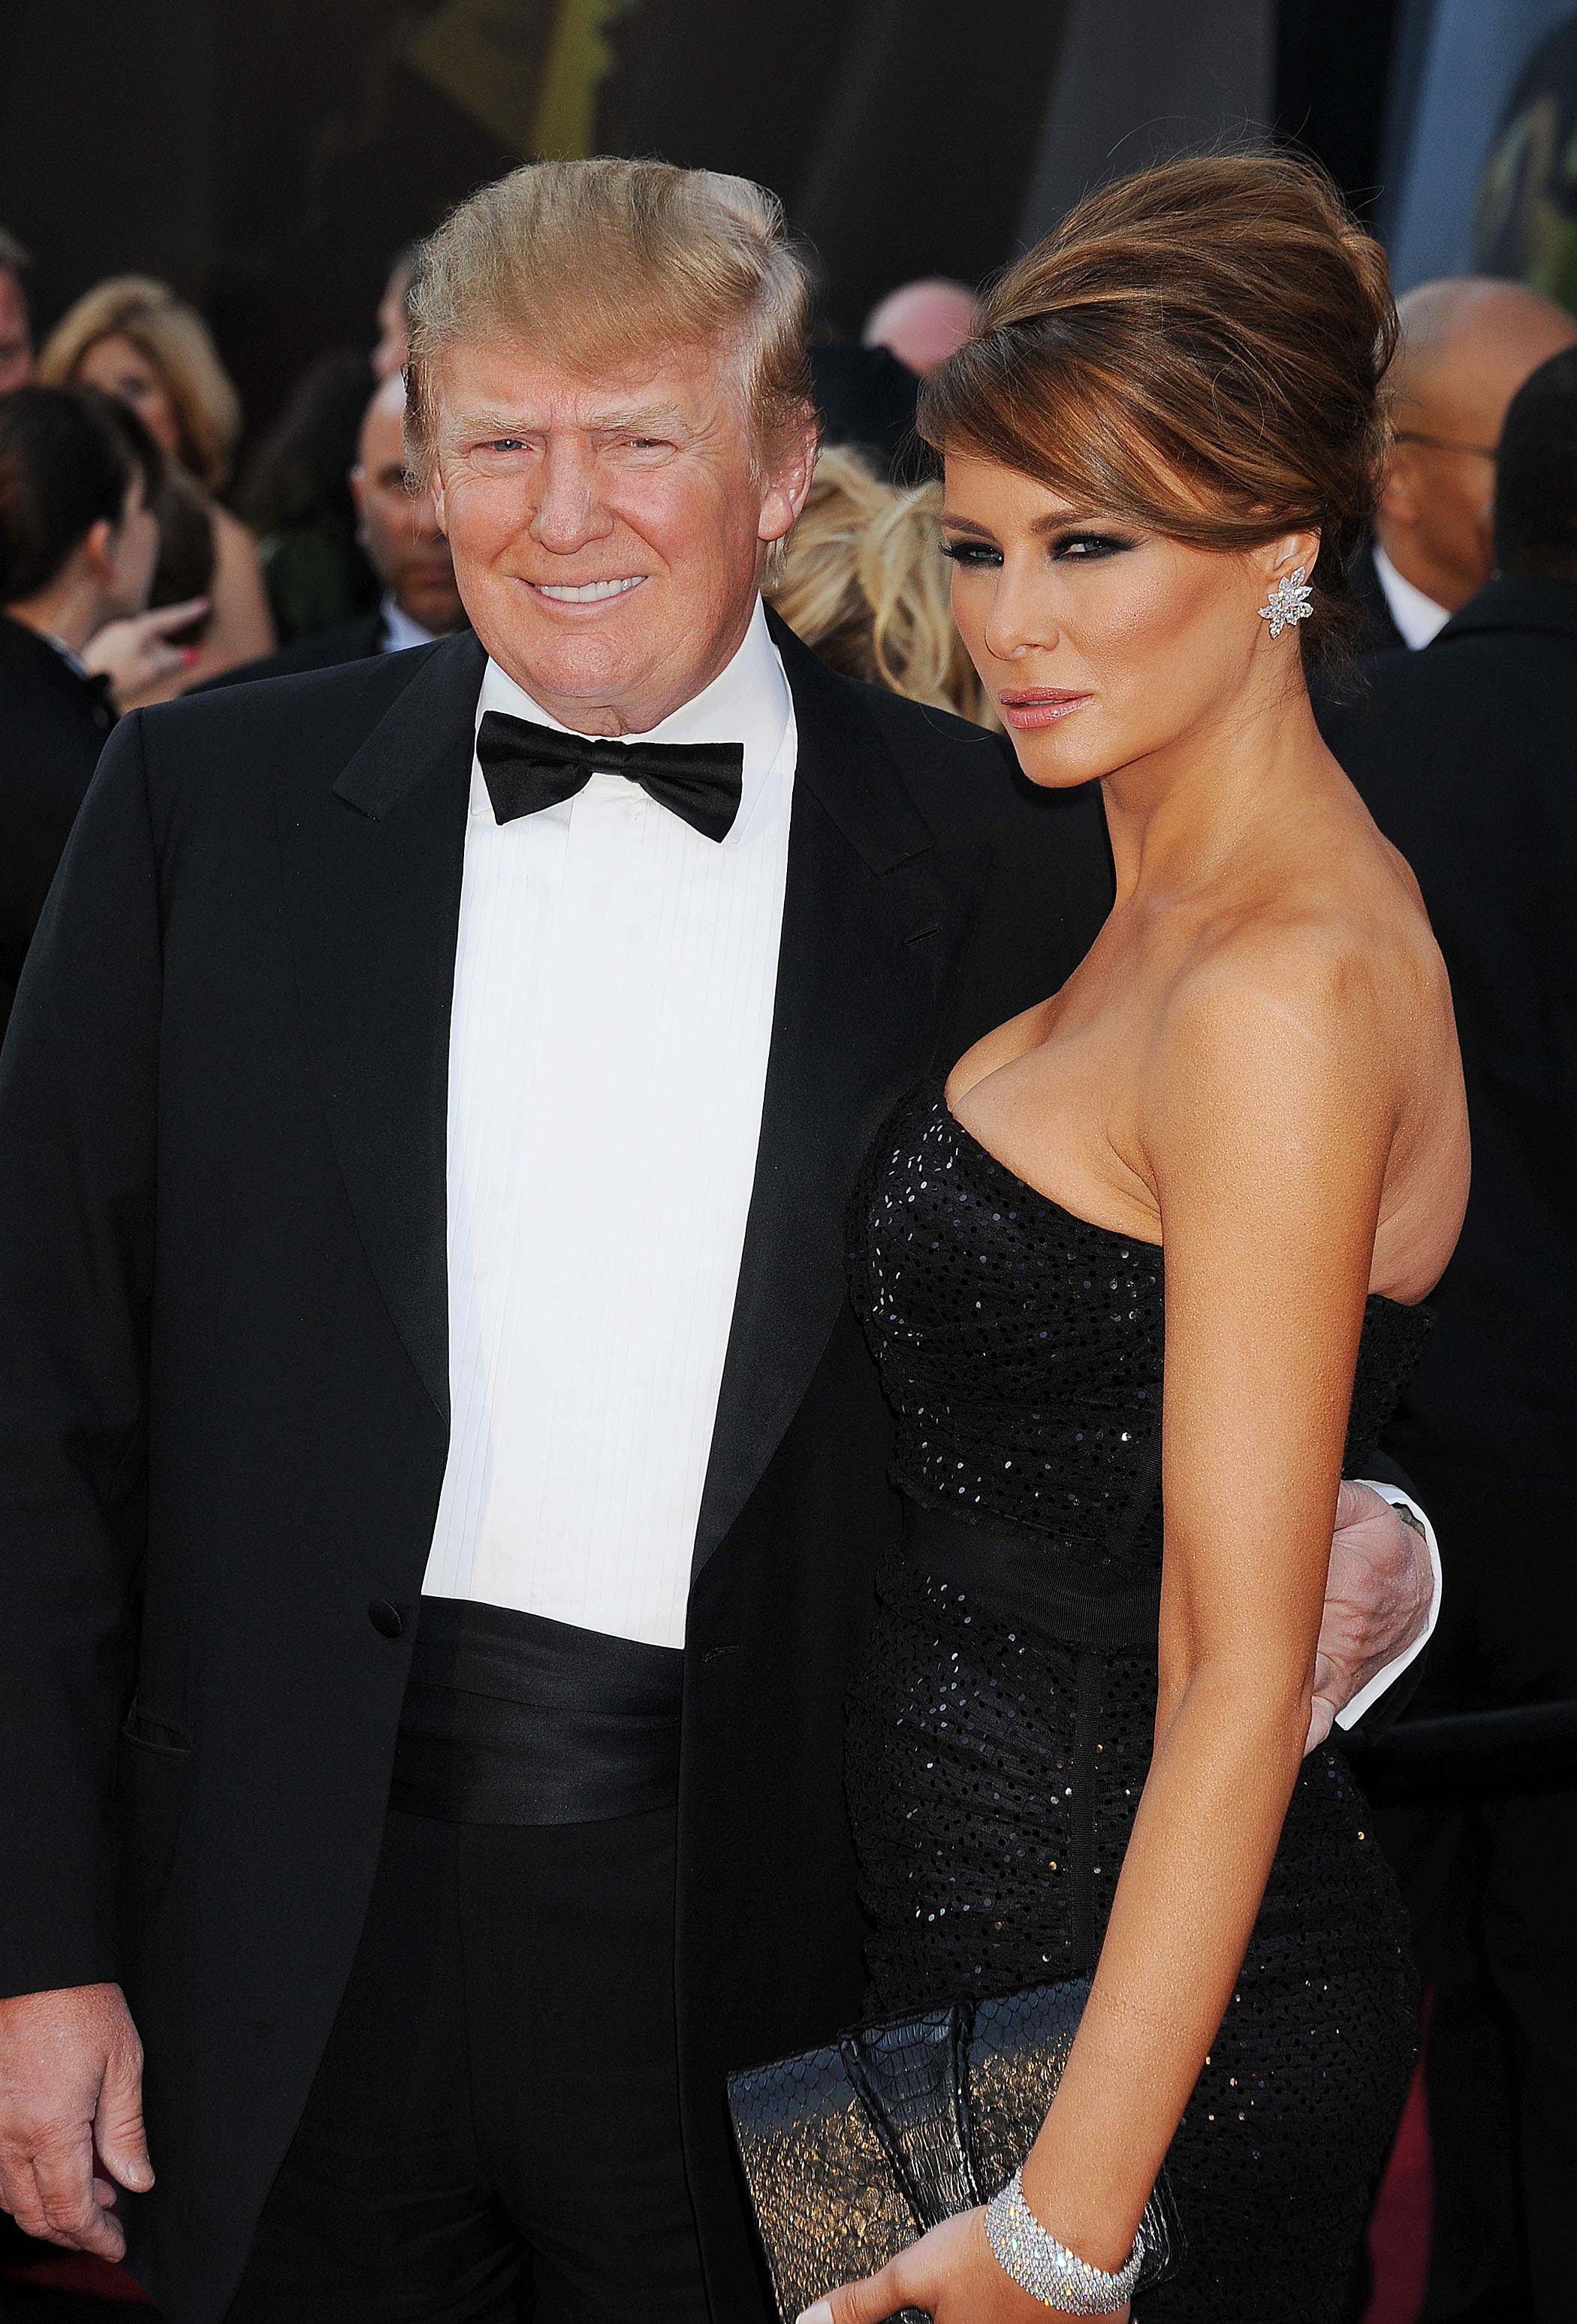 HOLLYWOOD, CA - FEBRUARY 27: Donald Trump and wife Melania Trump arrive at the 83rd Annual Academy Awards held at the Kodak Theatre on February 27, 2011 in Hollywood, California. (Photo by Jeffrey Mayer/WireImage)